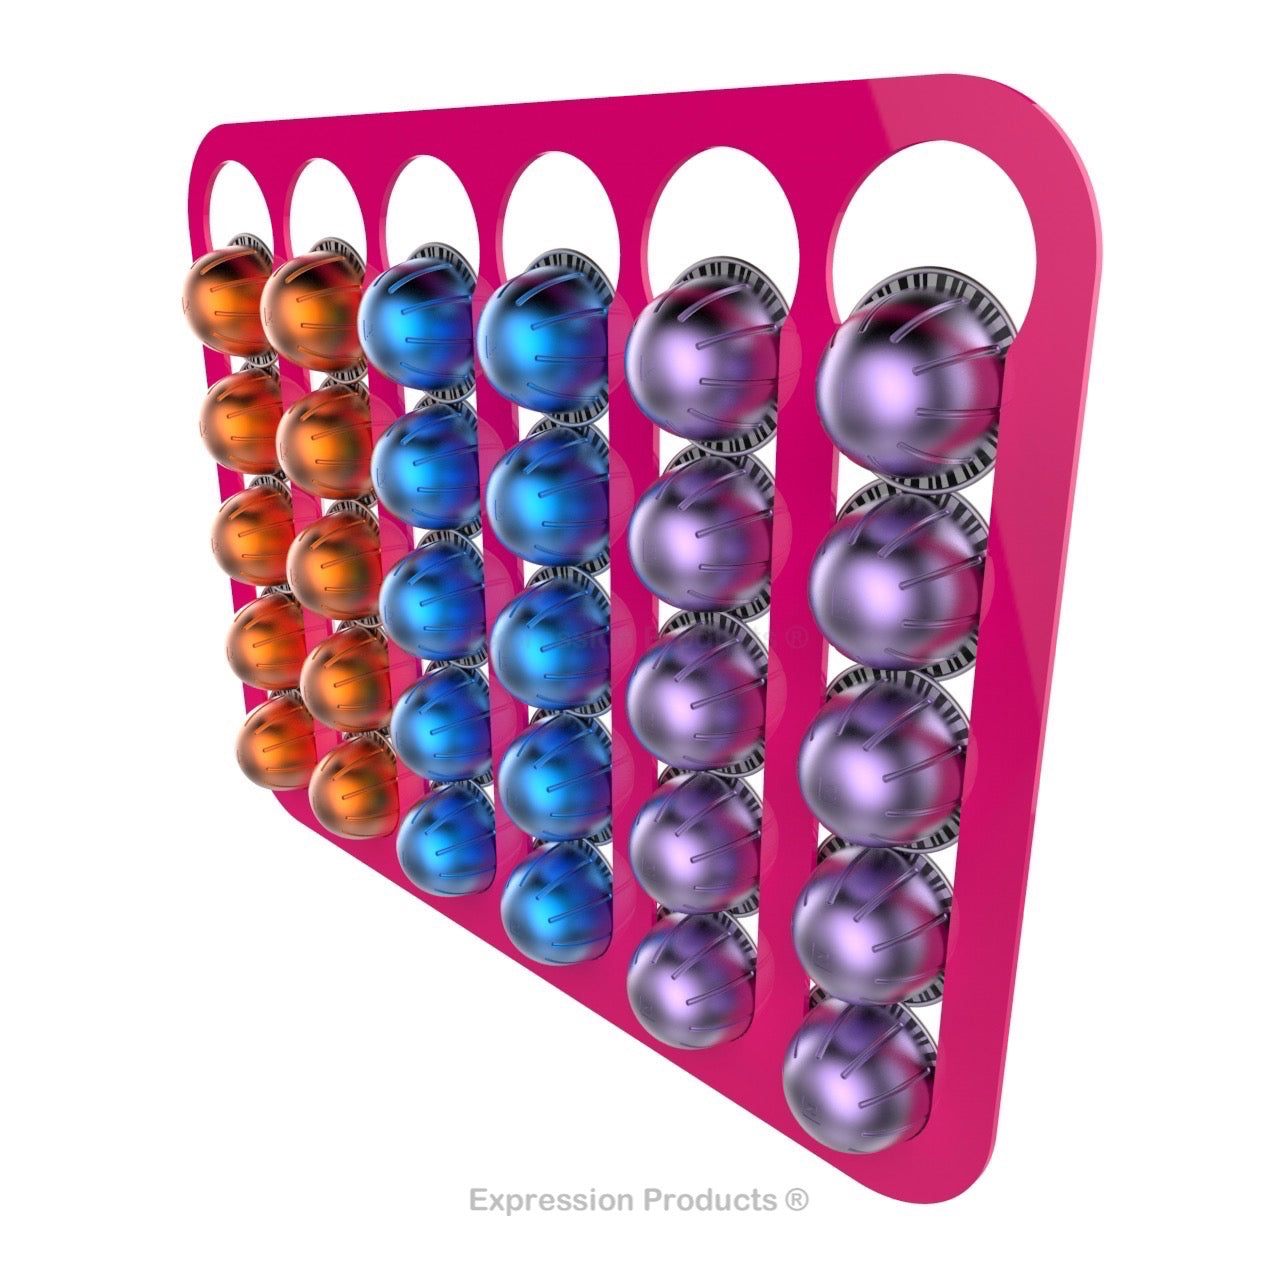 Magnetic Nespresso Vertuo capsule holder shown in pink holding 30 pods